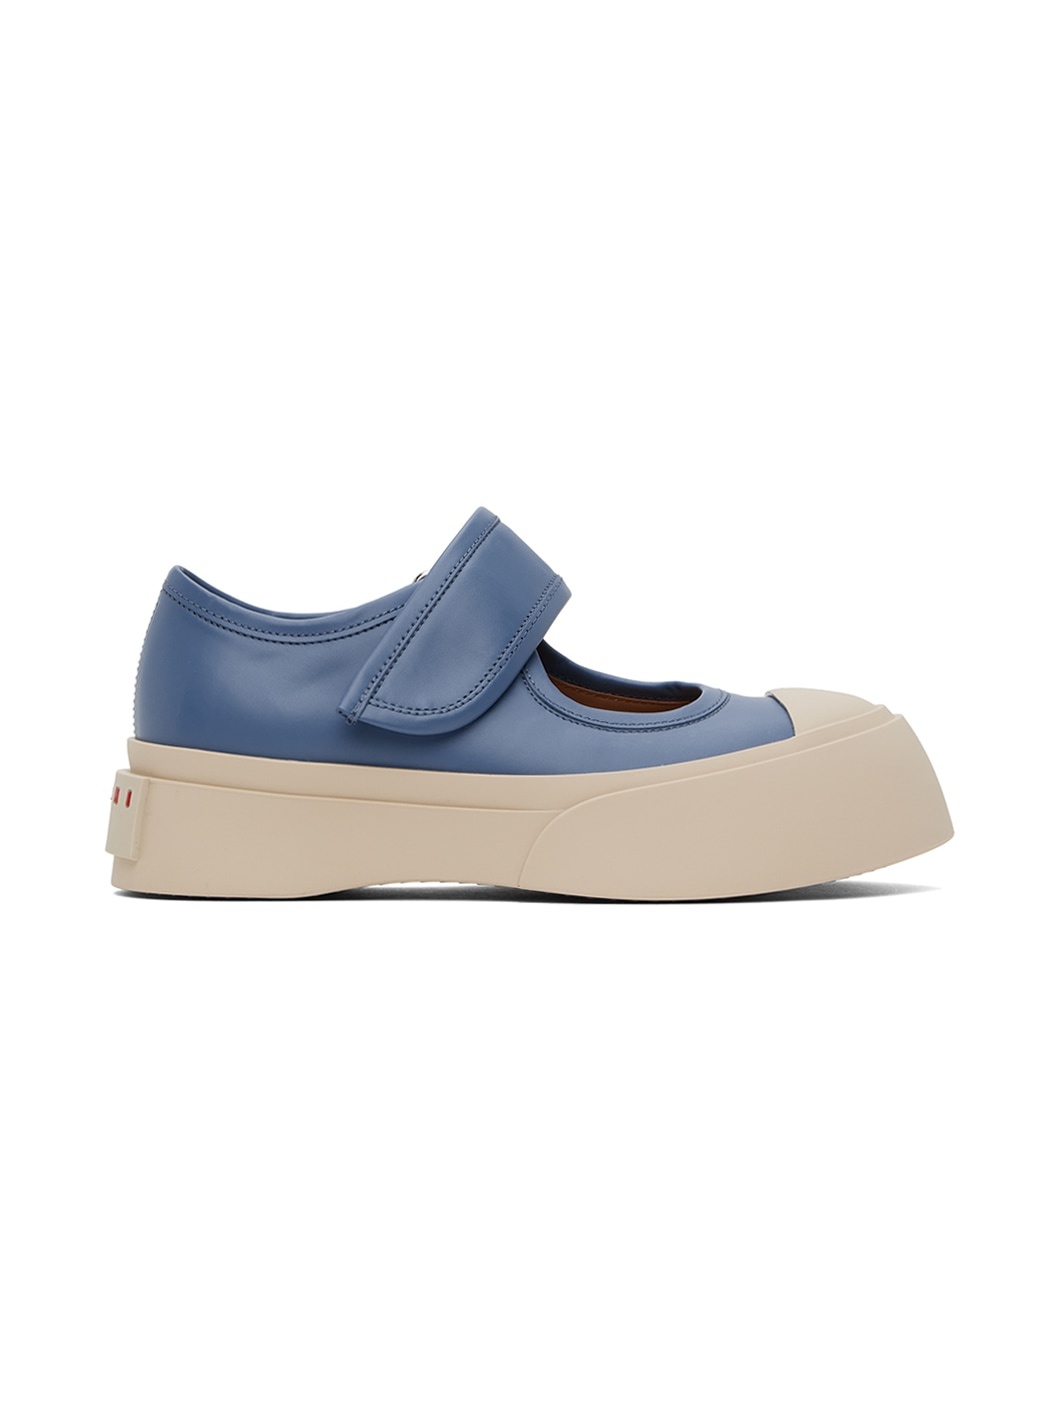 Blue Pablo Mary Jane Sneakers - 1